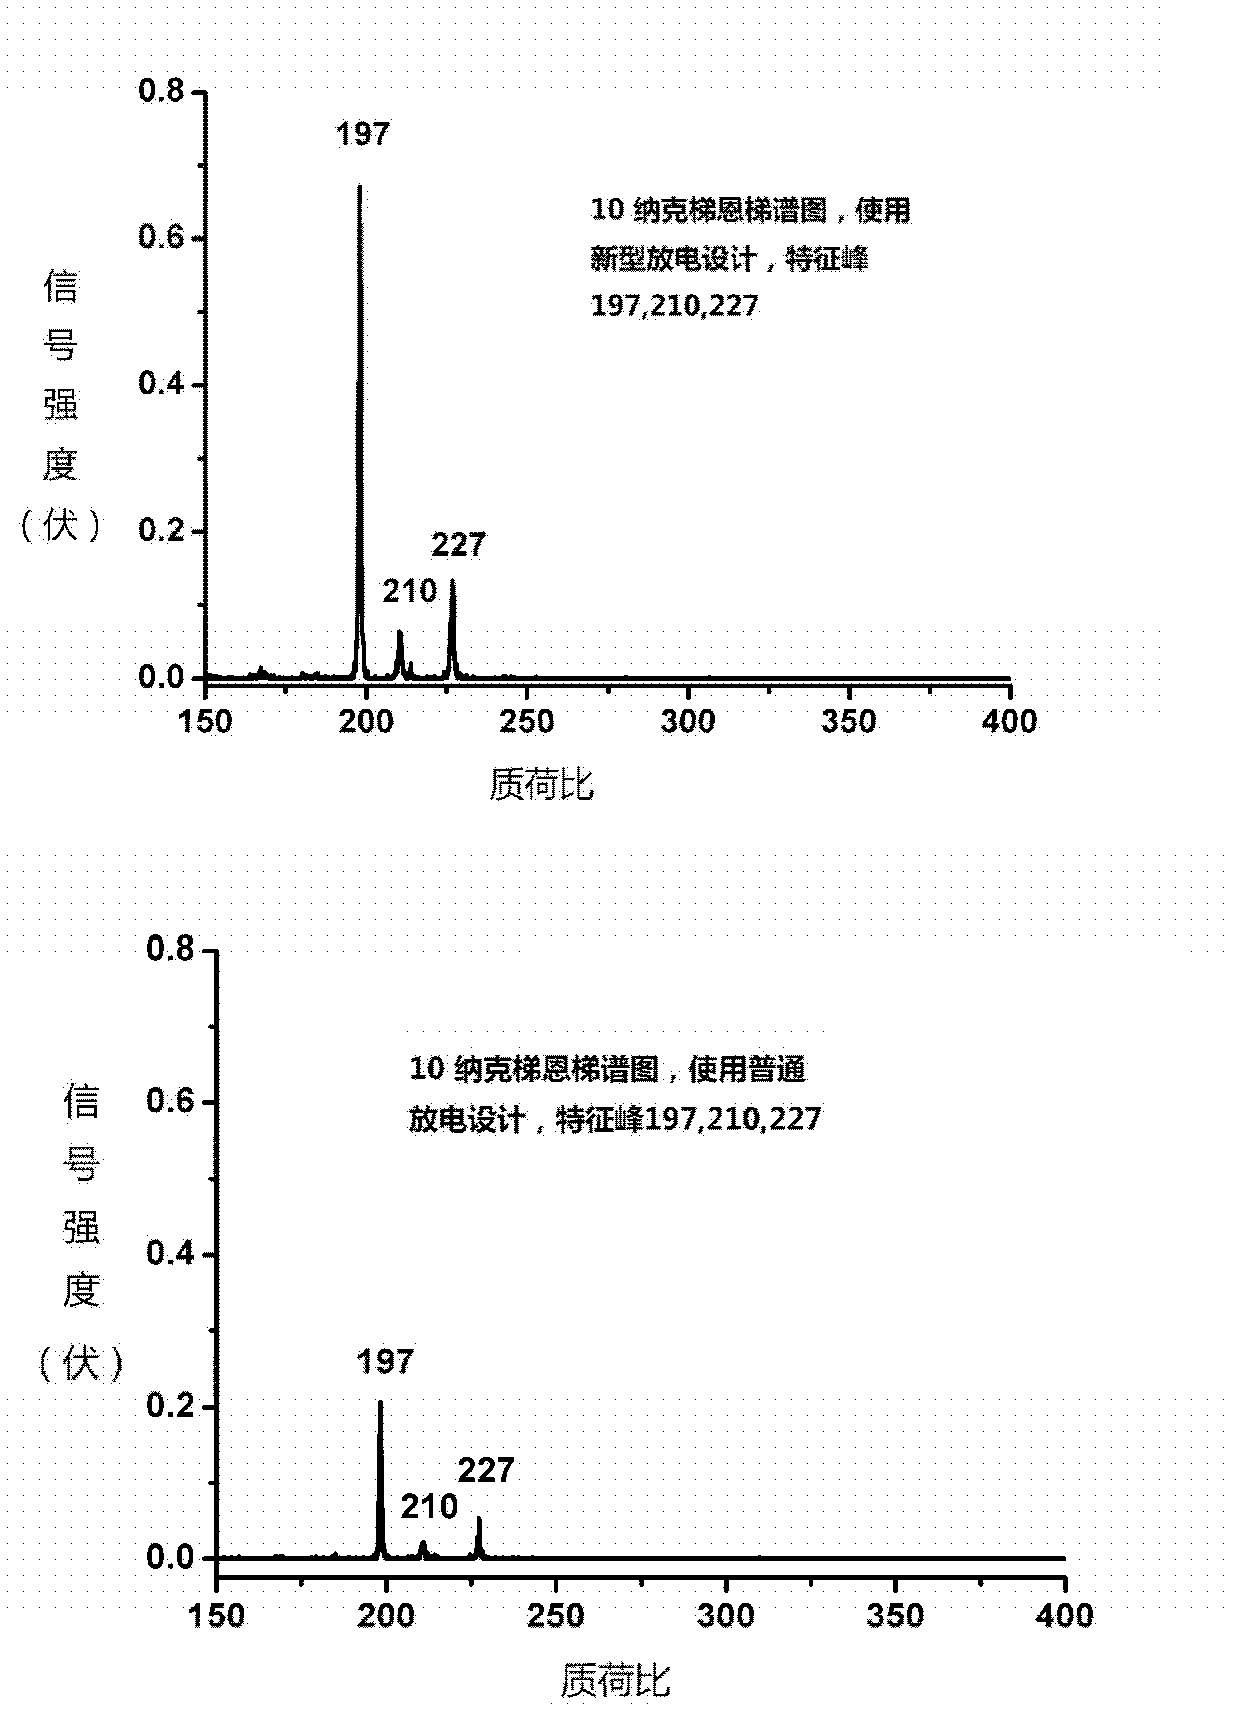 High-sensitivity mass spectrum ionization source for analyzing explosive online and application thereof